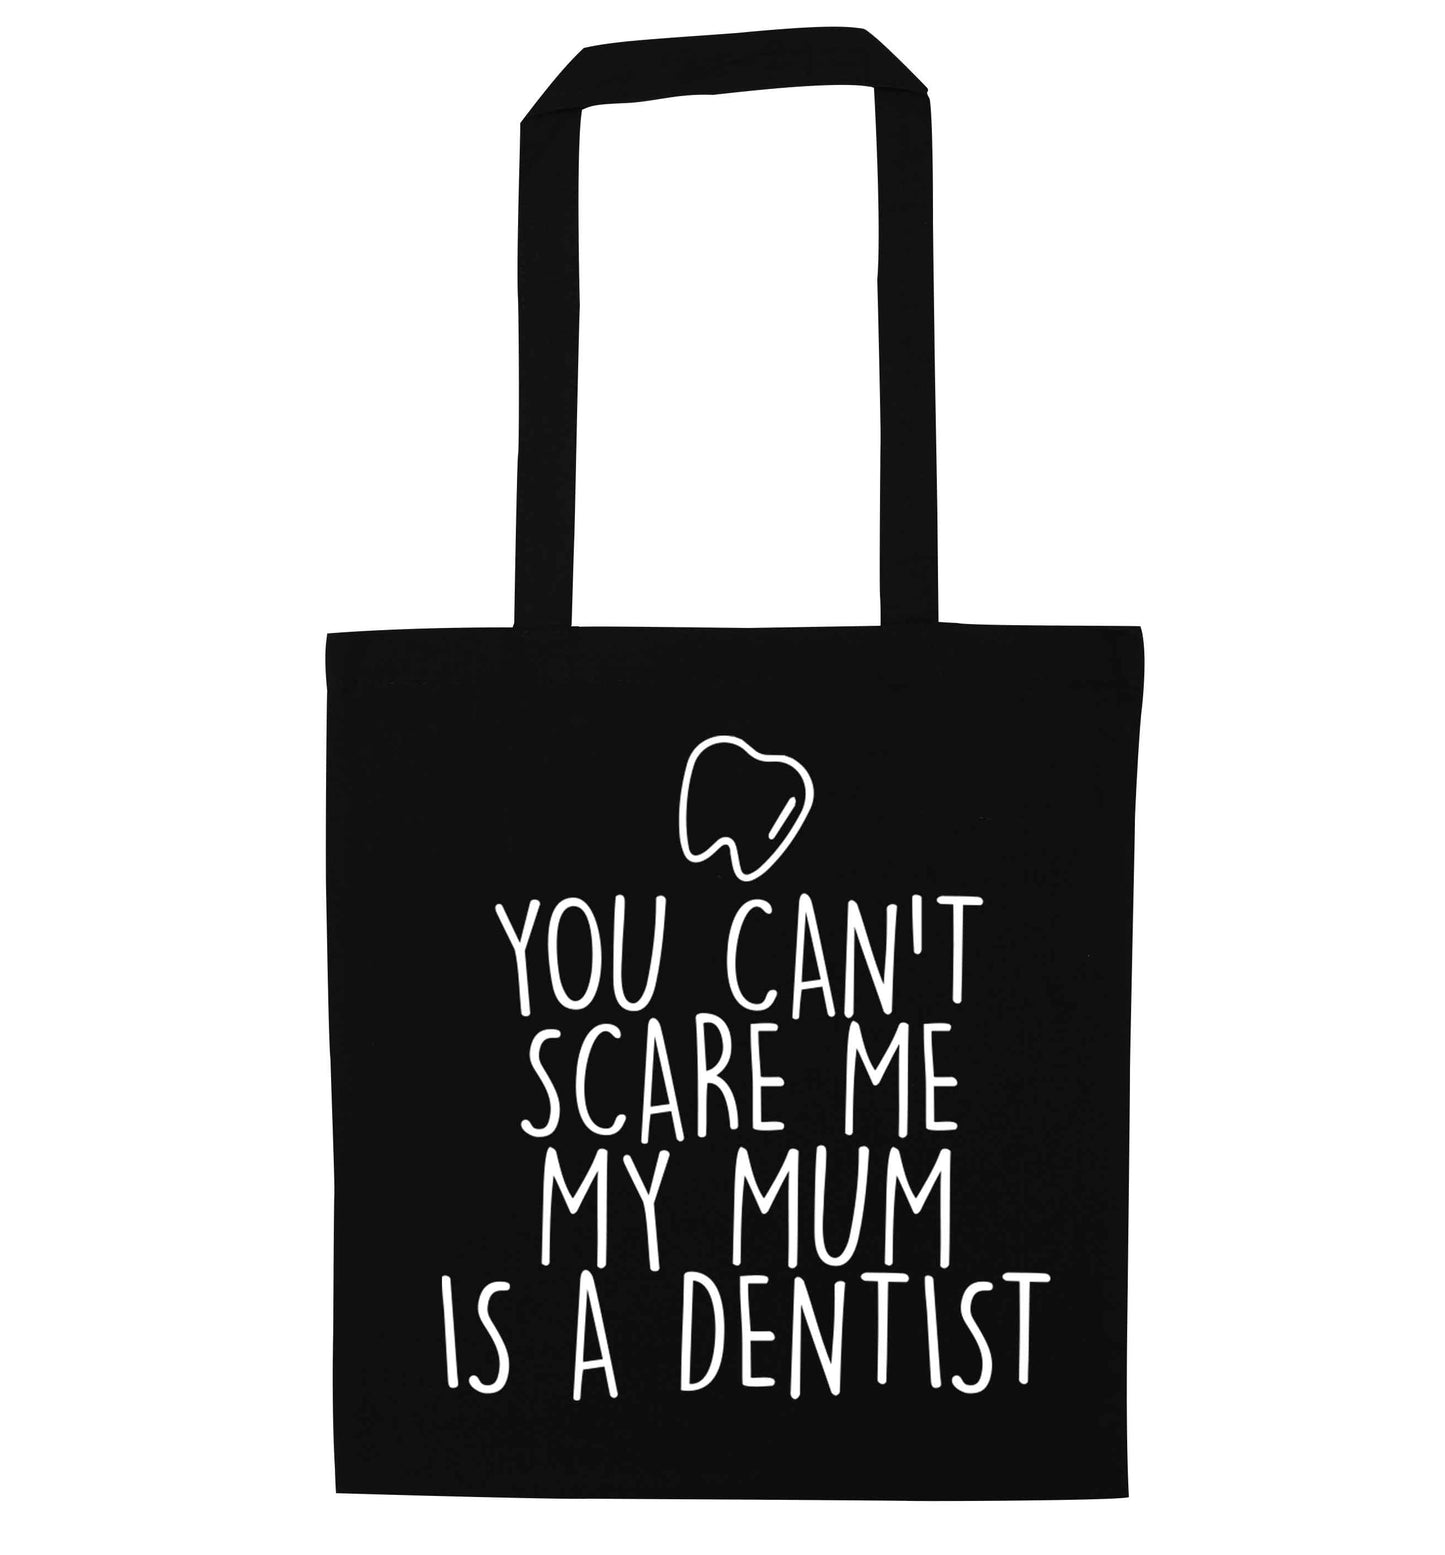 Minty Kisses Tooth Fairy (a) black tote bag